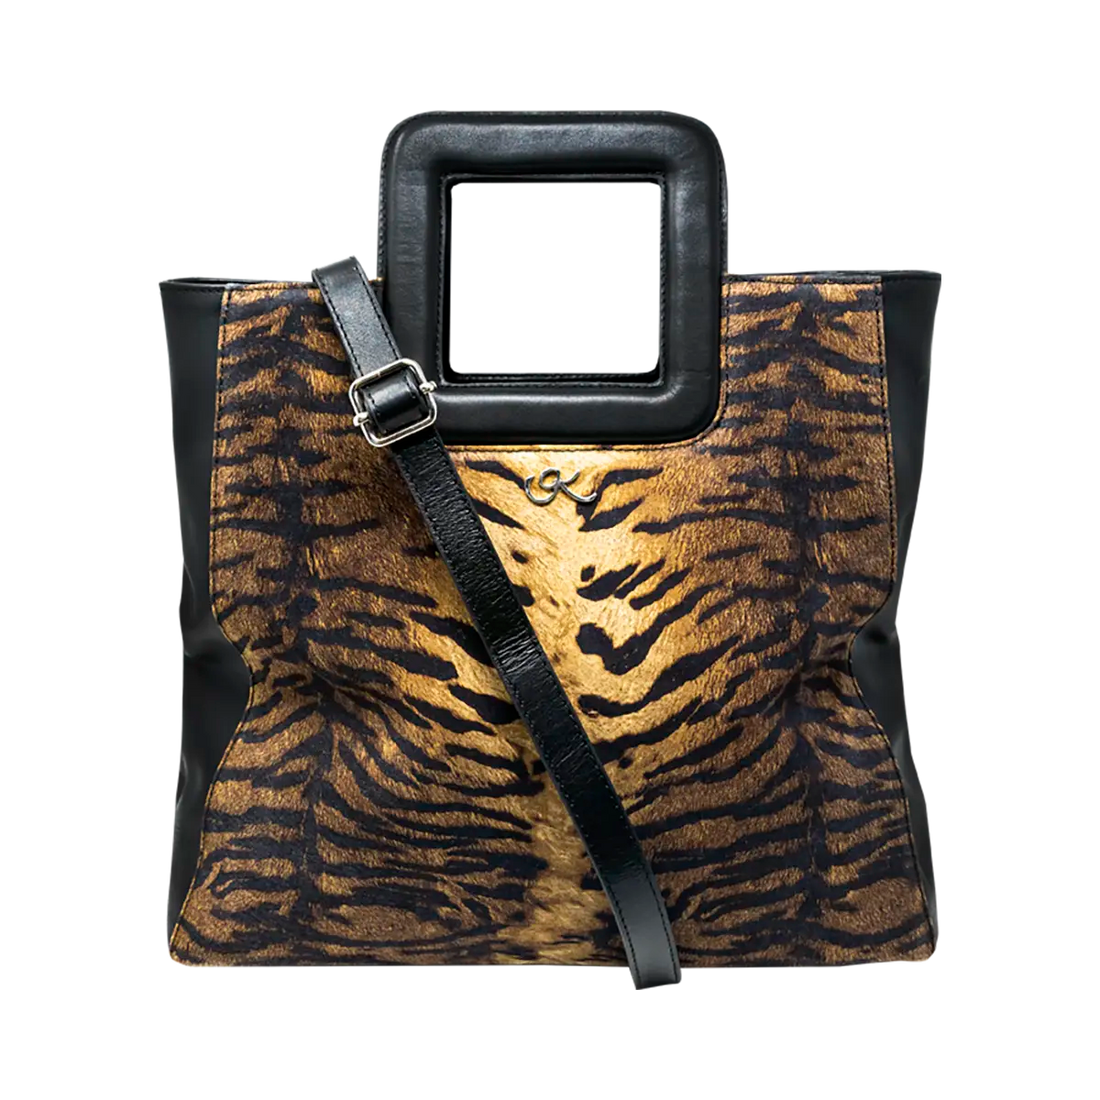 large black stripe print leather print handbag with a square handle. Accessory for women in San Diego, CA.